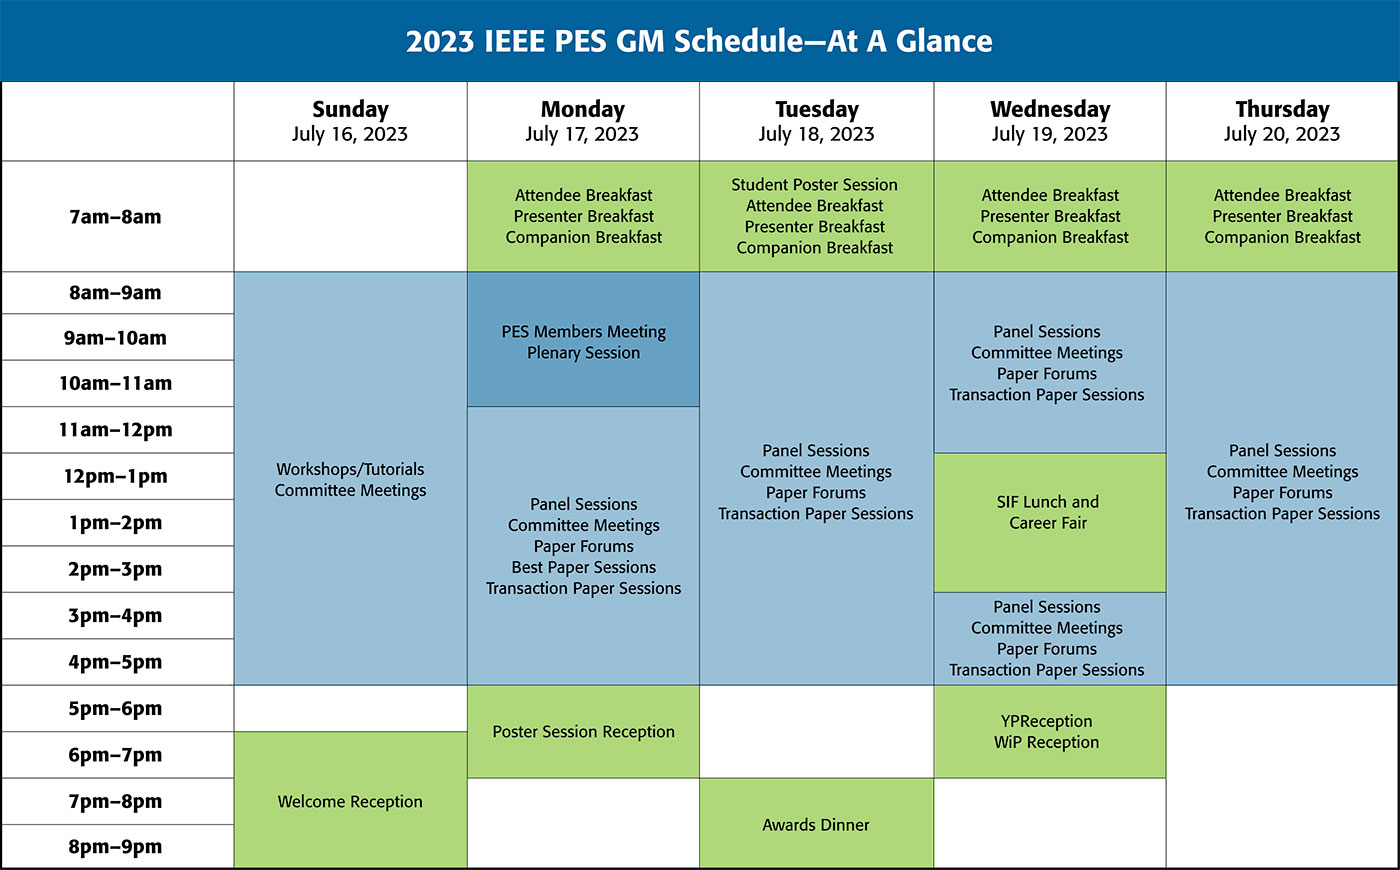 2023 IEEE PES GM Schedule at-a-glance